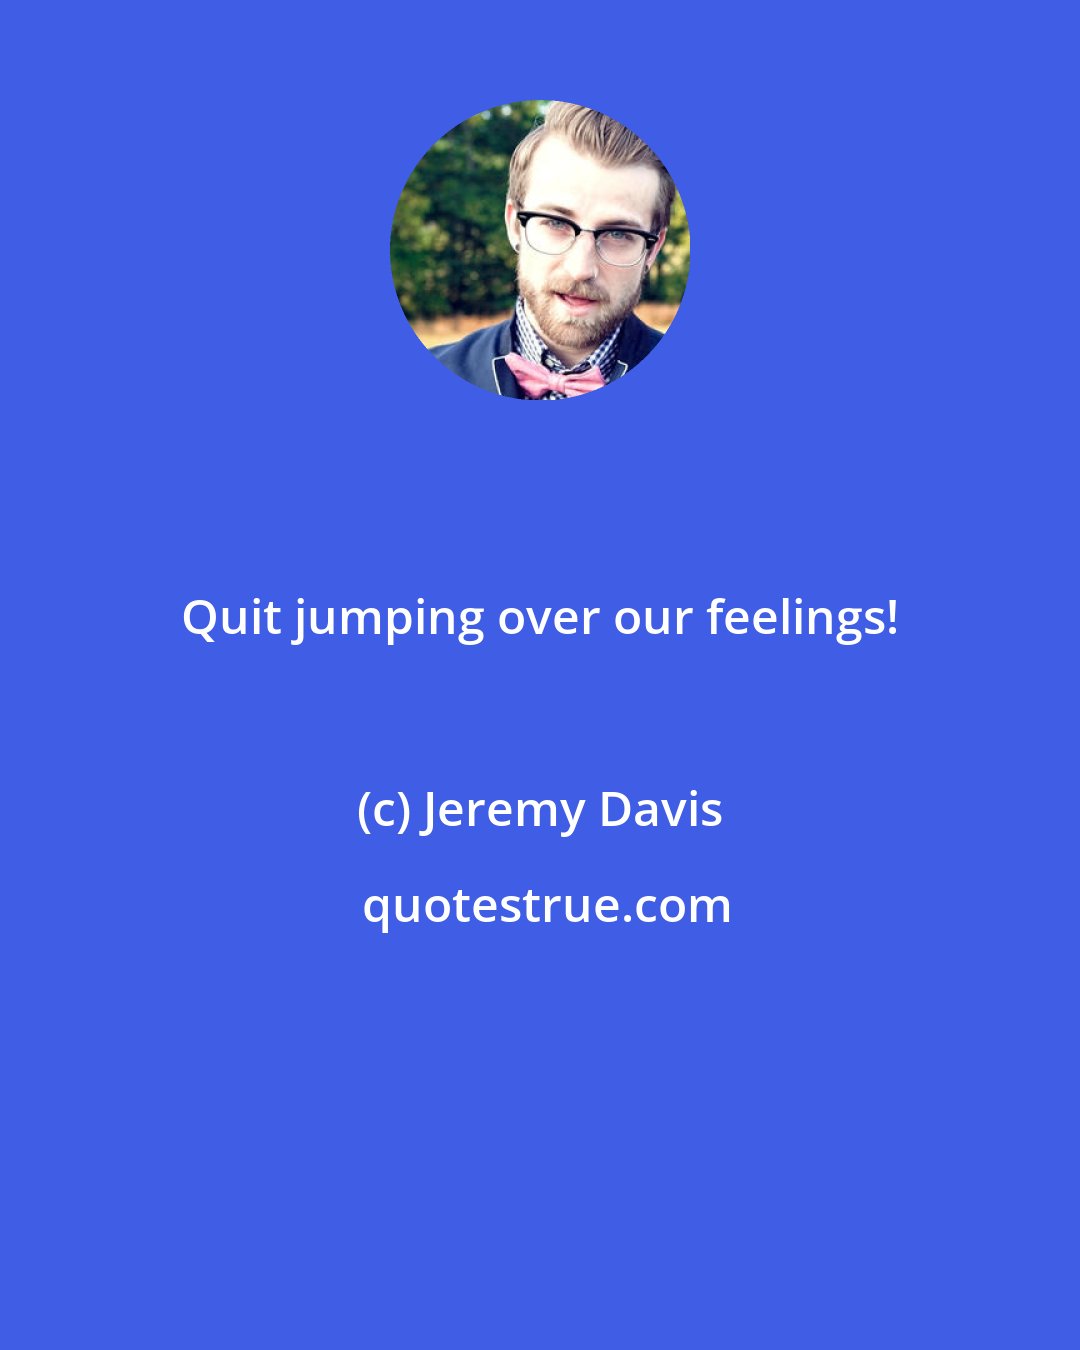 Jeremy Davis: Quit jumping over our feelings!